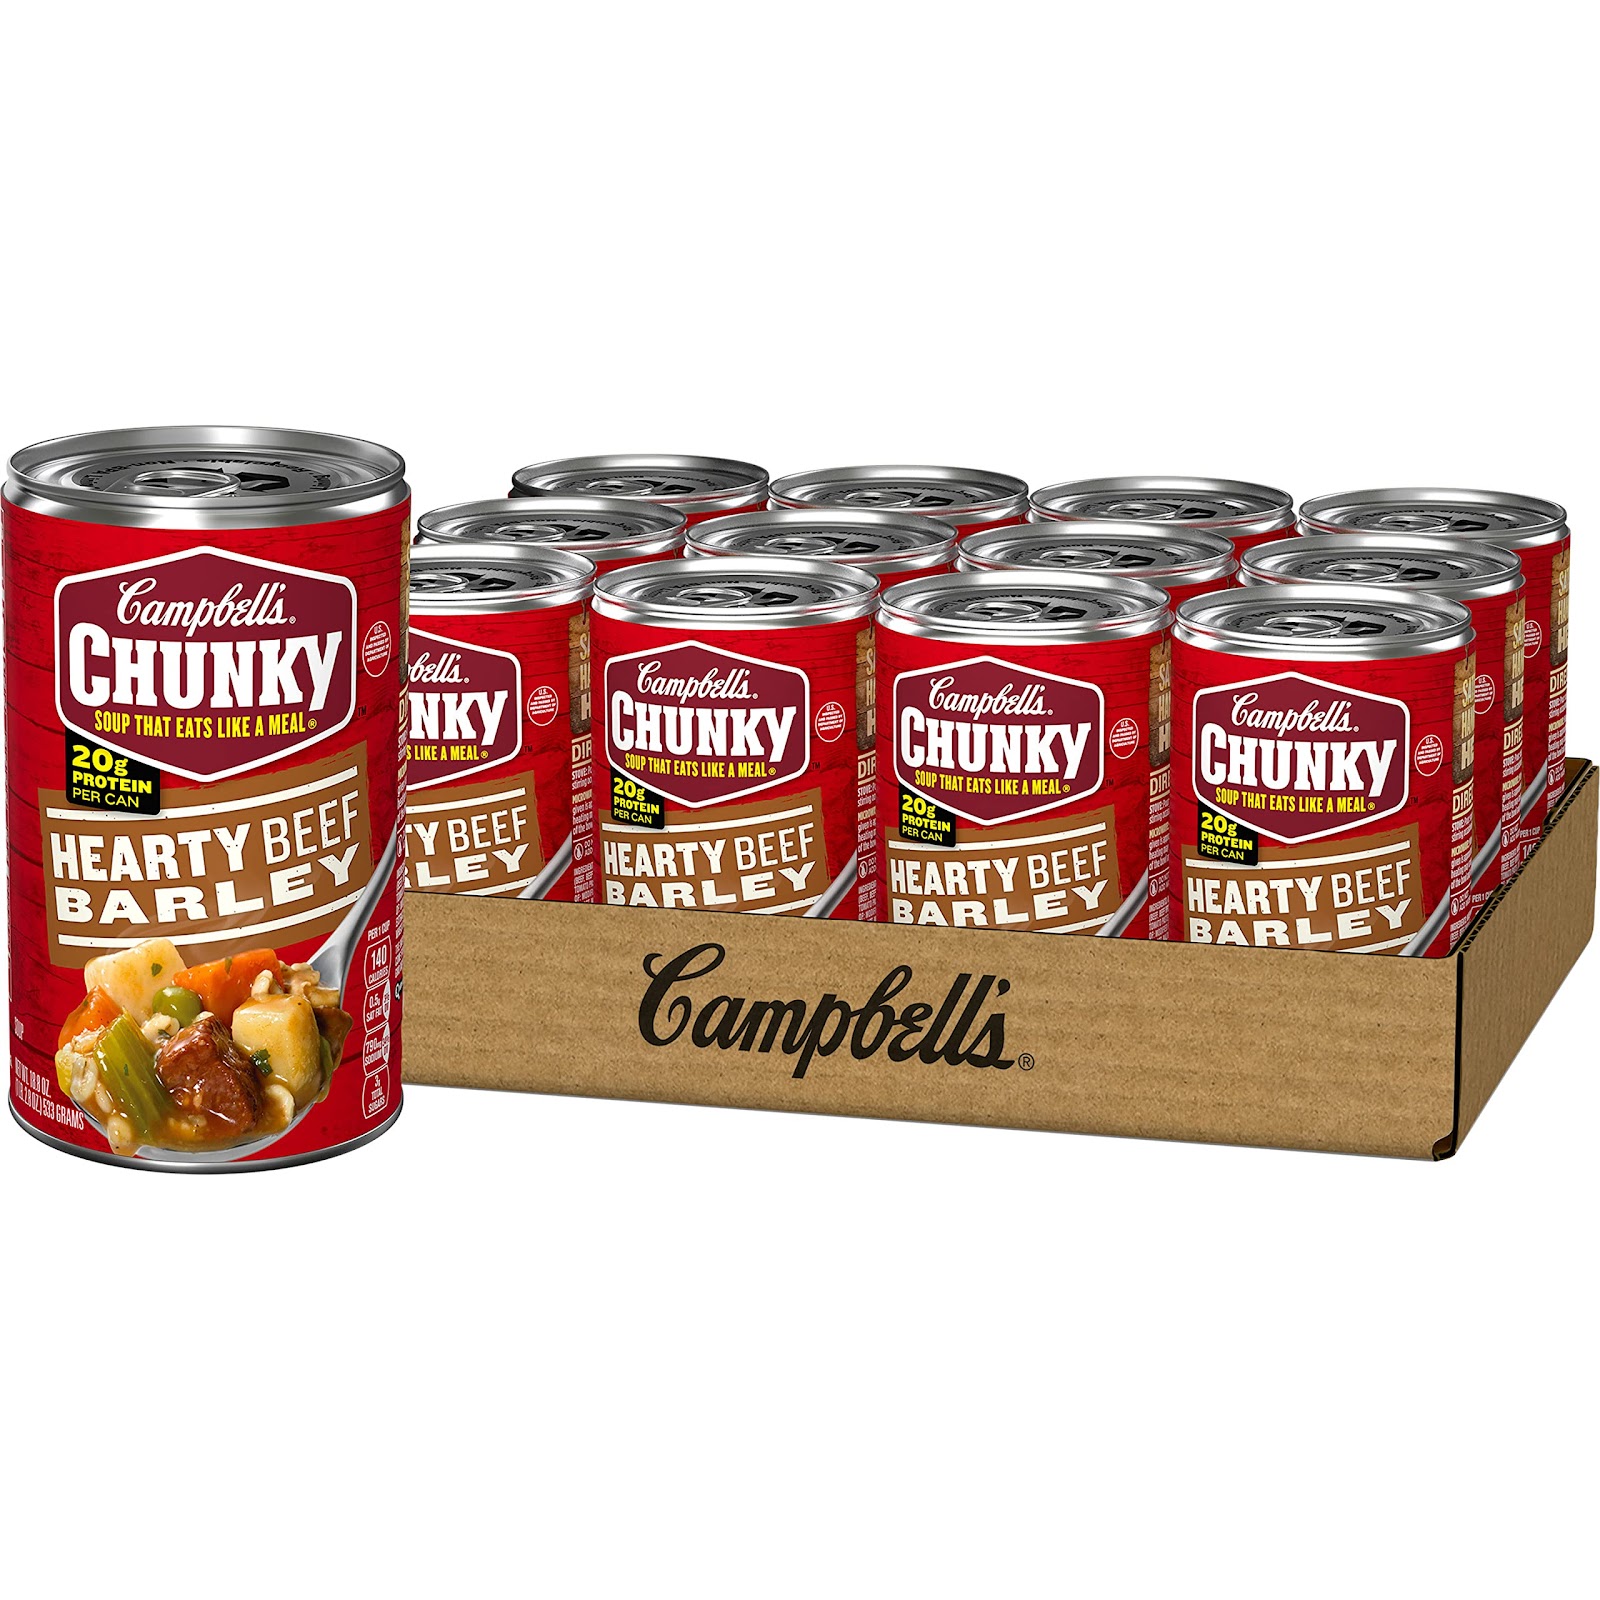 Campbell's Chunky Soup, Hearty Beef and Barley Soup